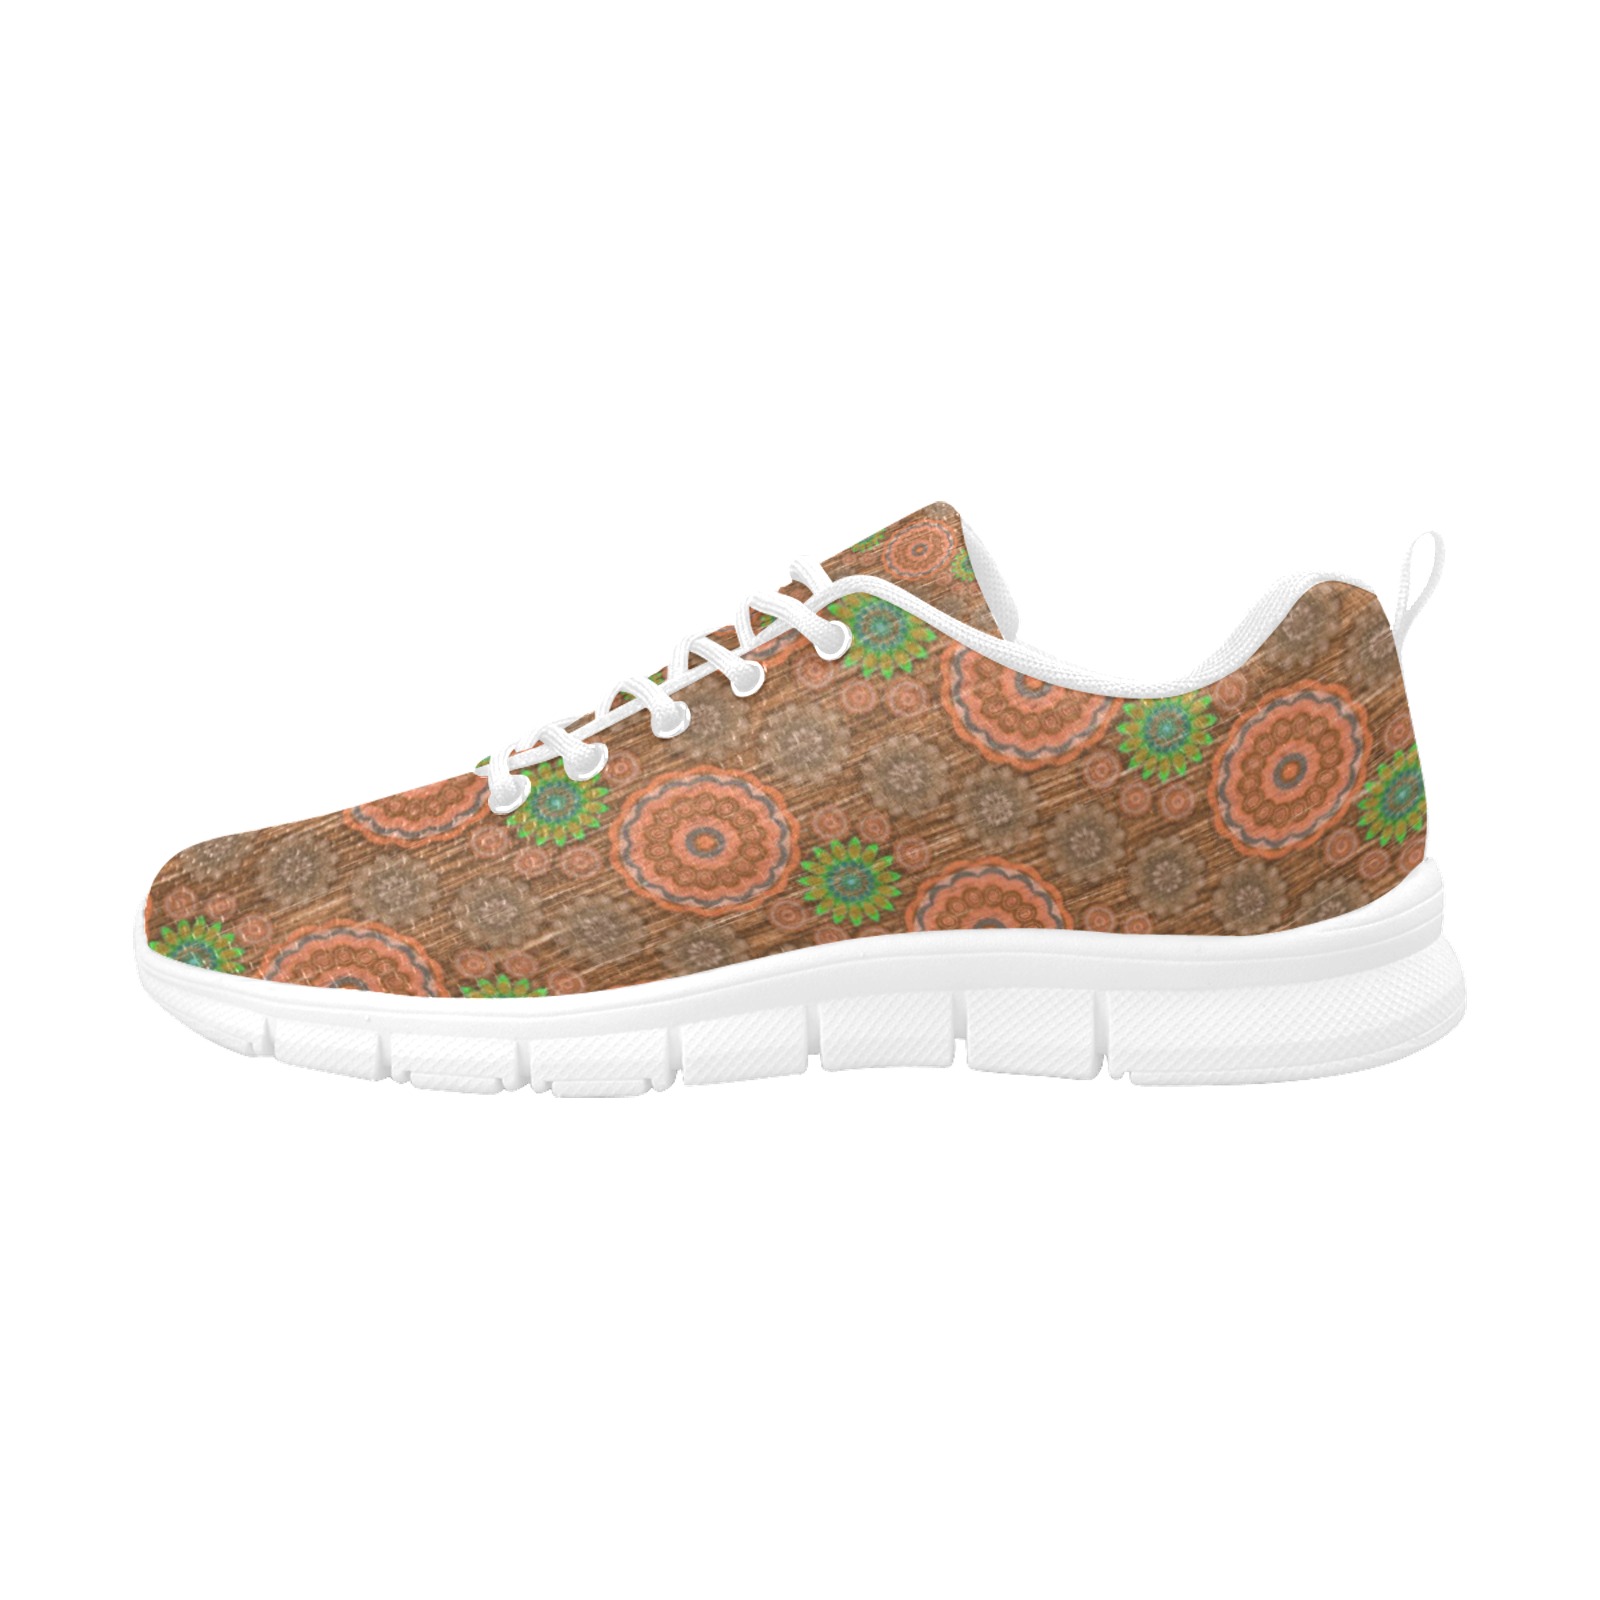 The Orange floral rainy scatter fibers textured Women's Breathable Running Shoes (Model 055)